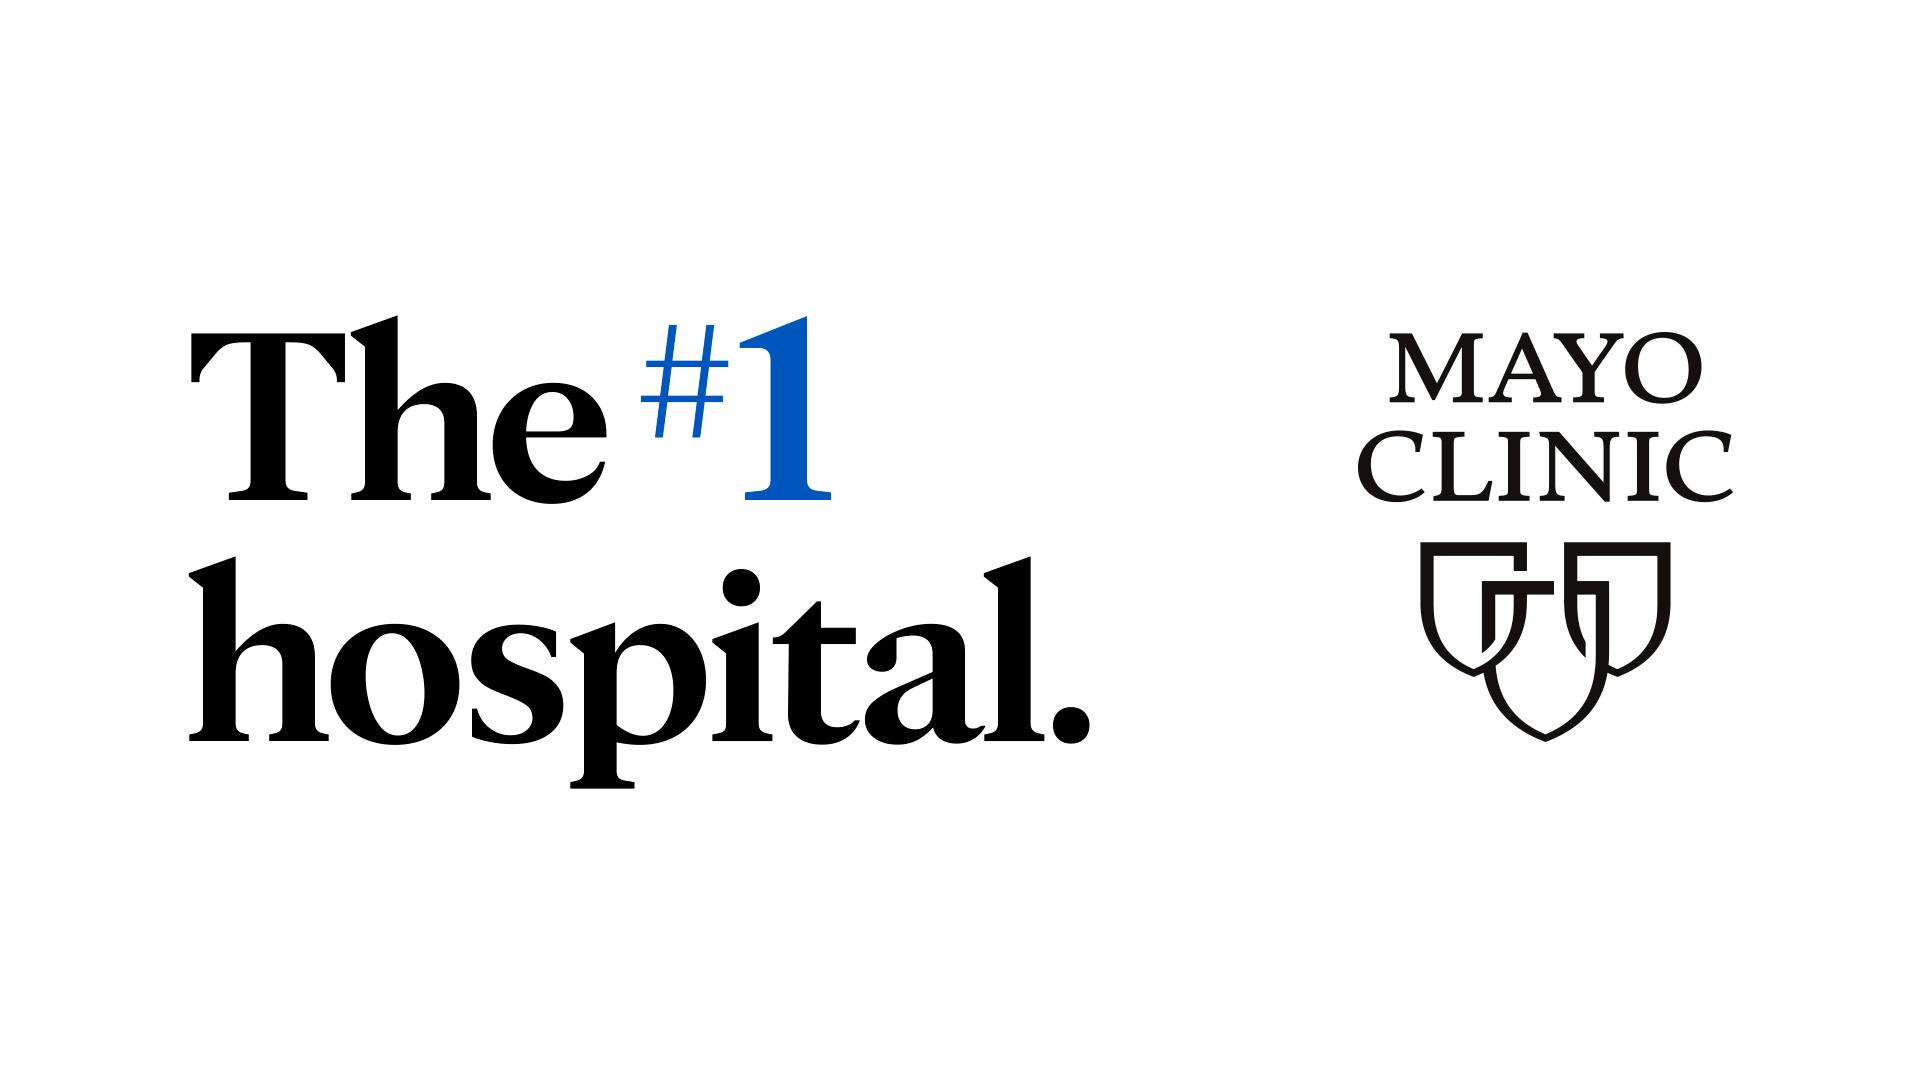 U.S. News & World Report ranking Mayo Clinic as number one hospital